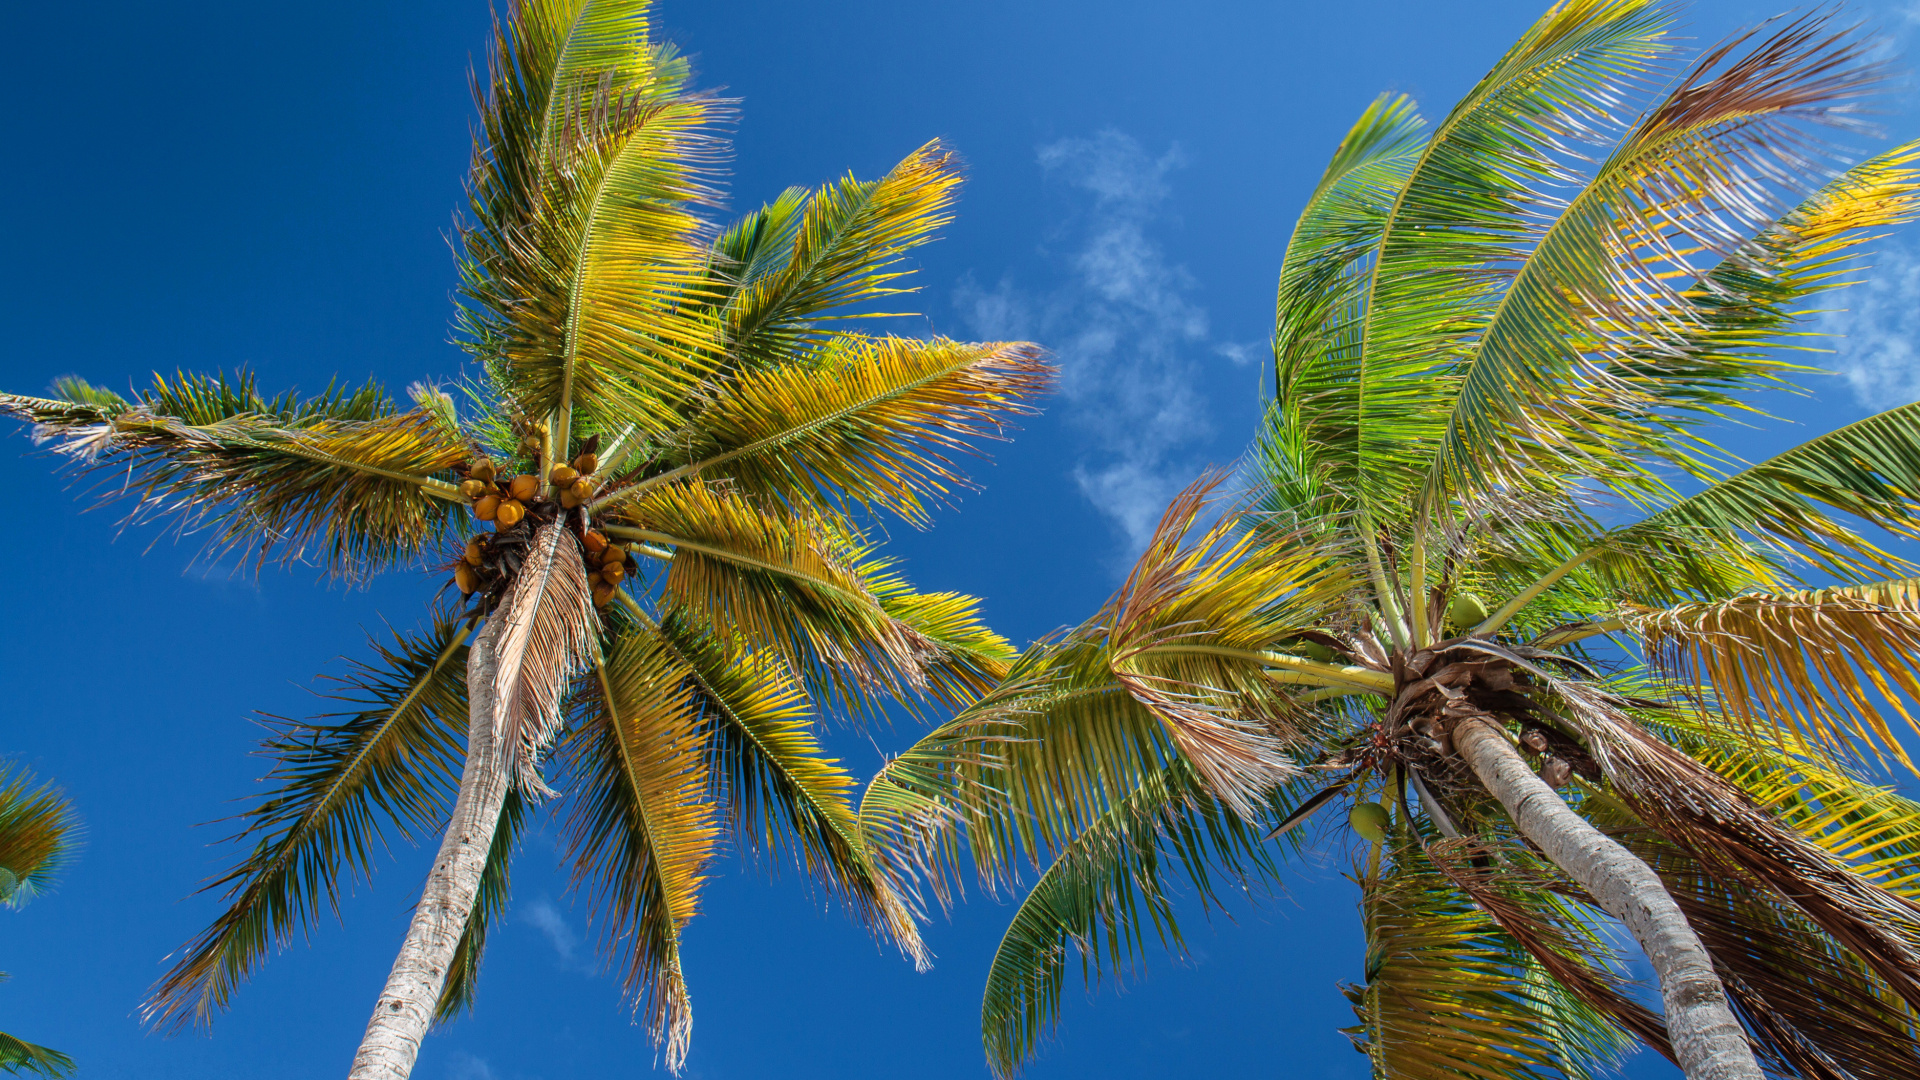 Green Palm Tree Under Blue Sky During Daytime. Wallpaper in 1920x1080 Resolution